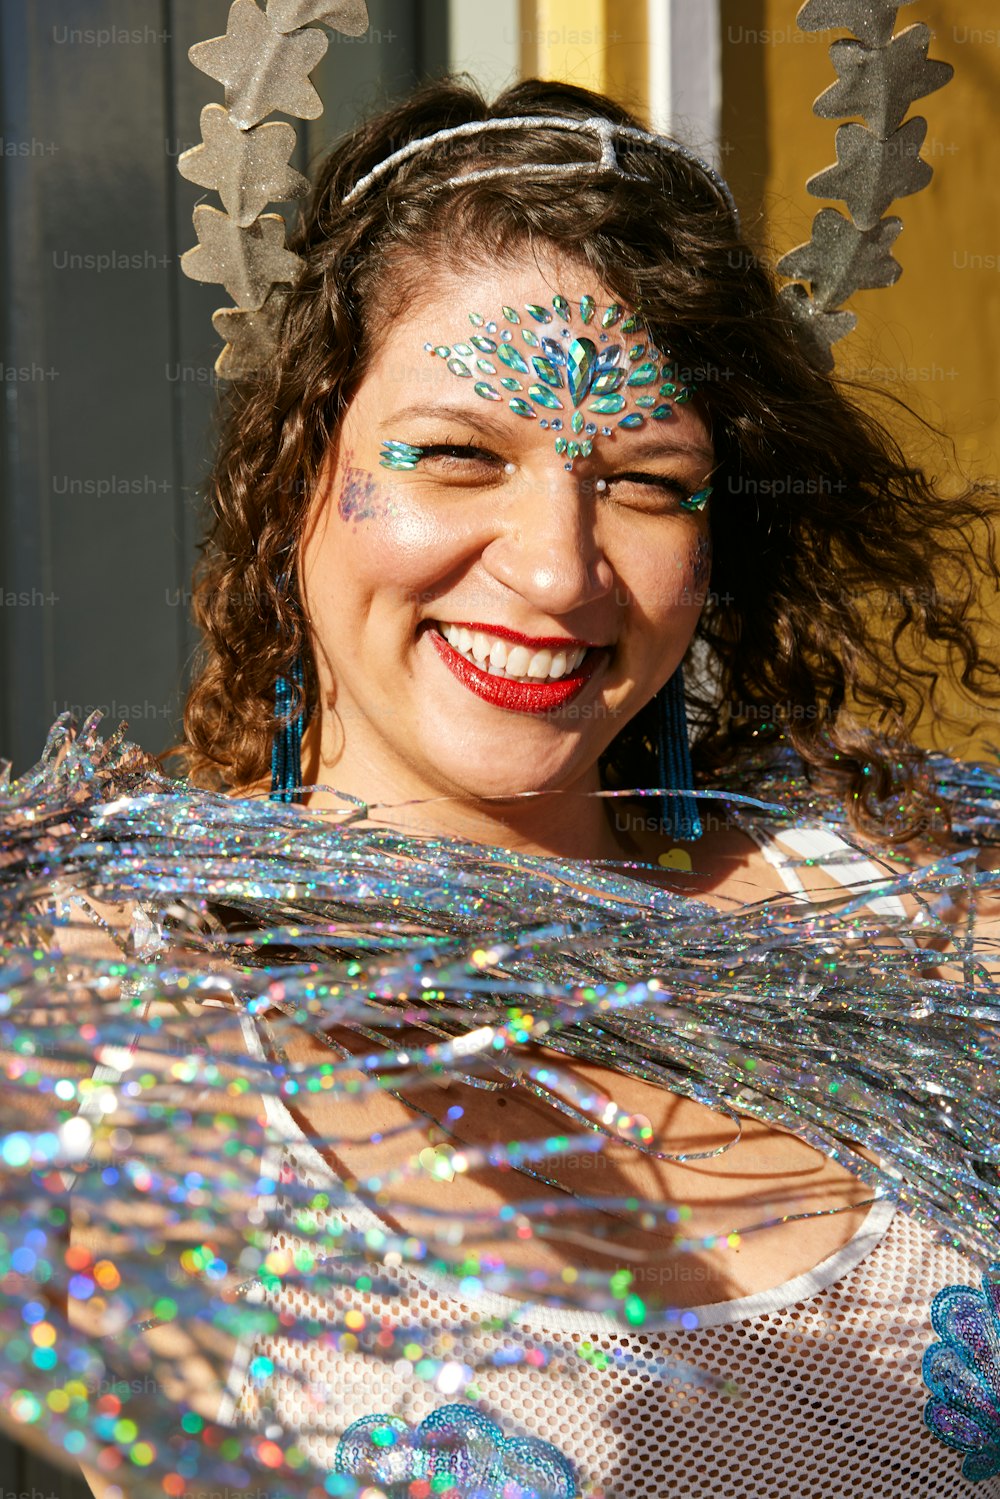 a woman wearing a costume and smiling for the camera